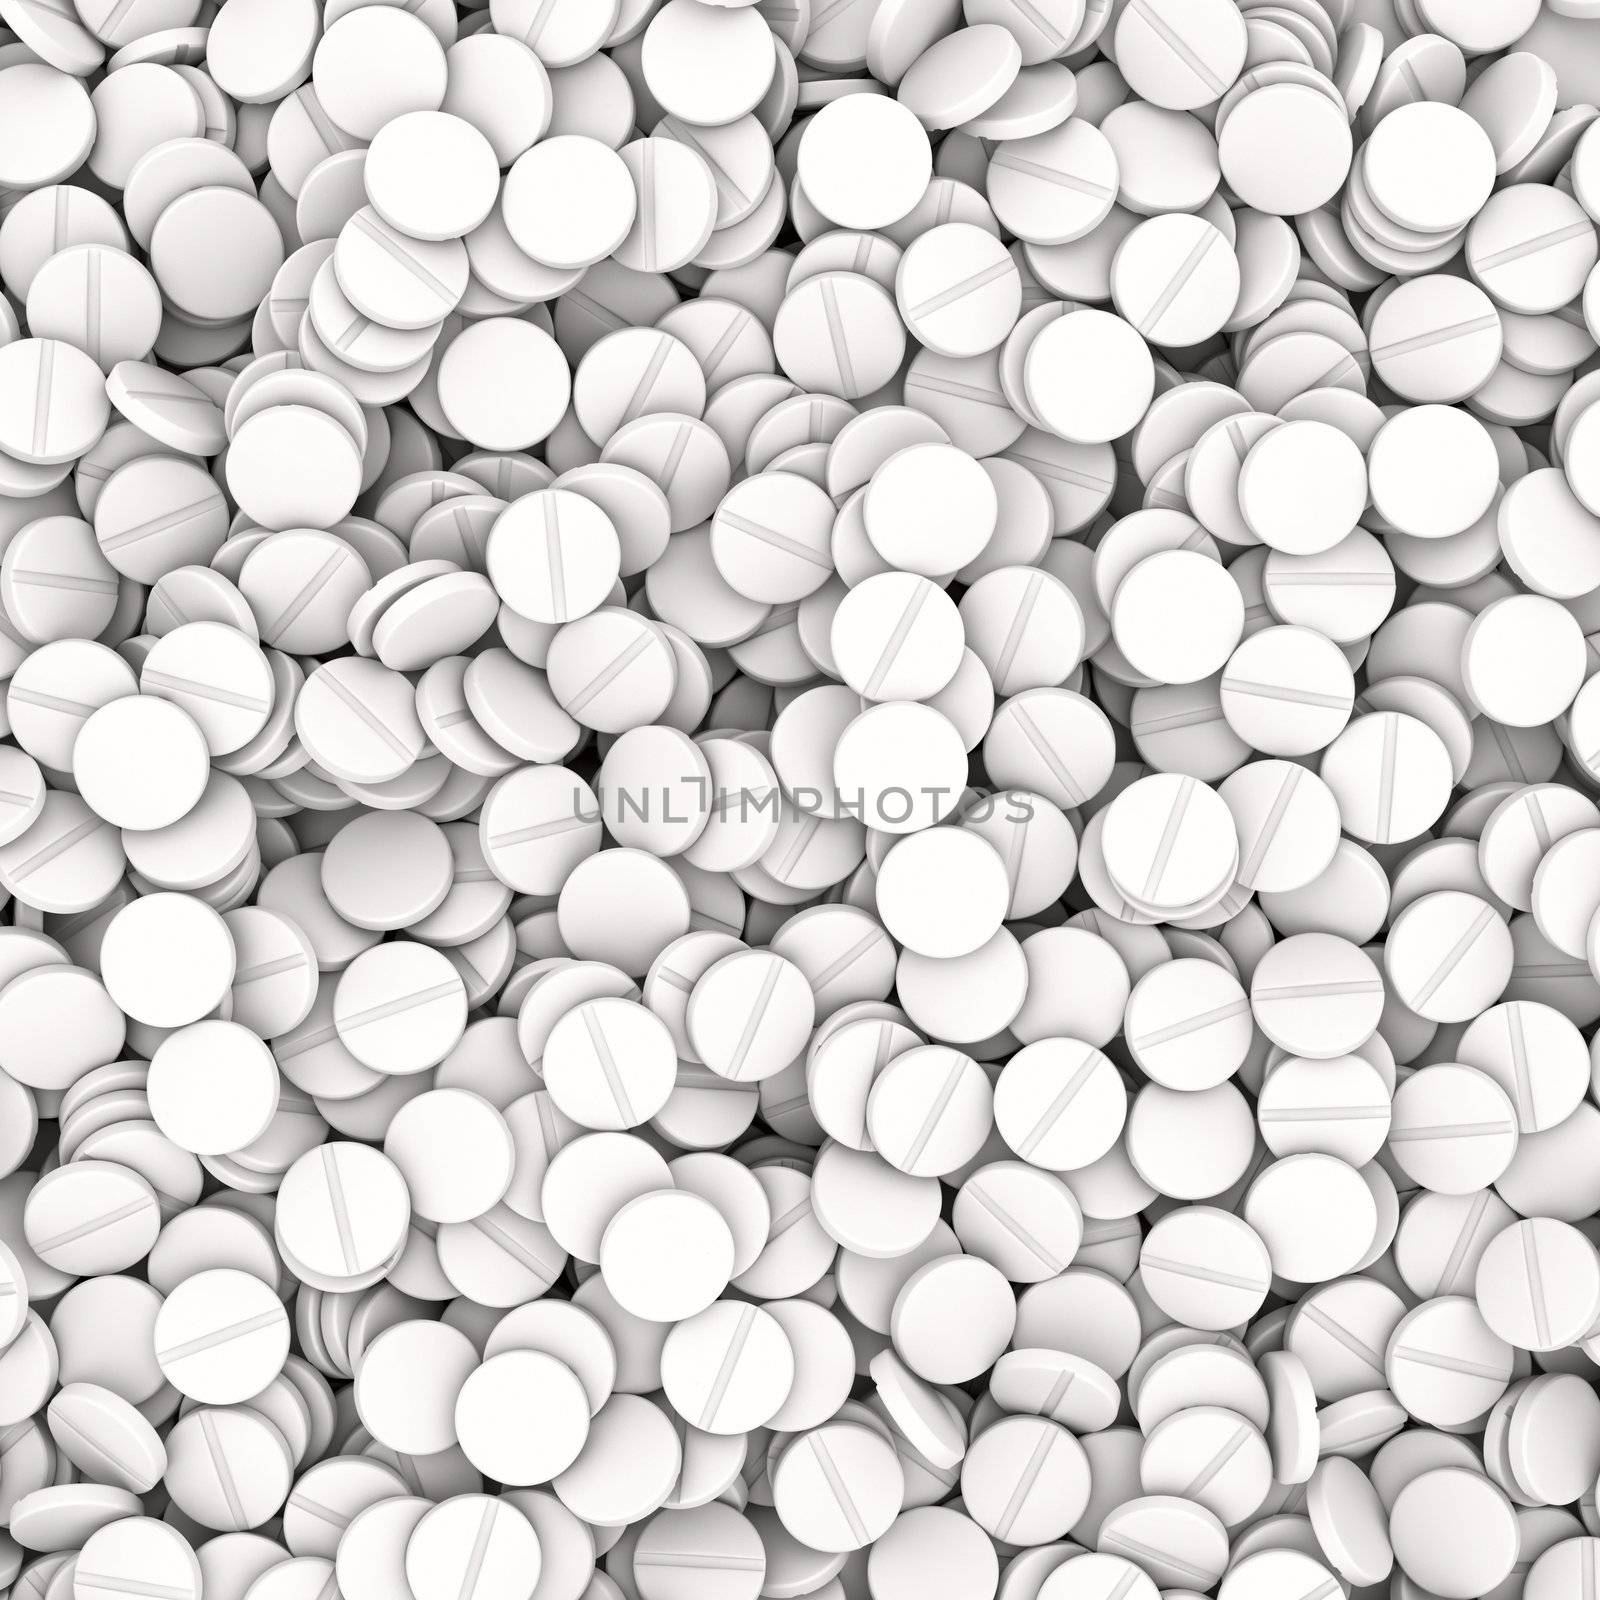 Heap of white tablets - medical background